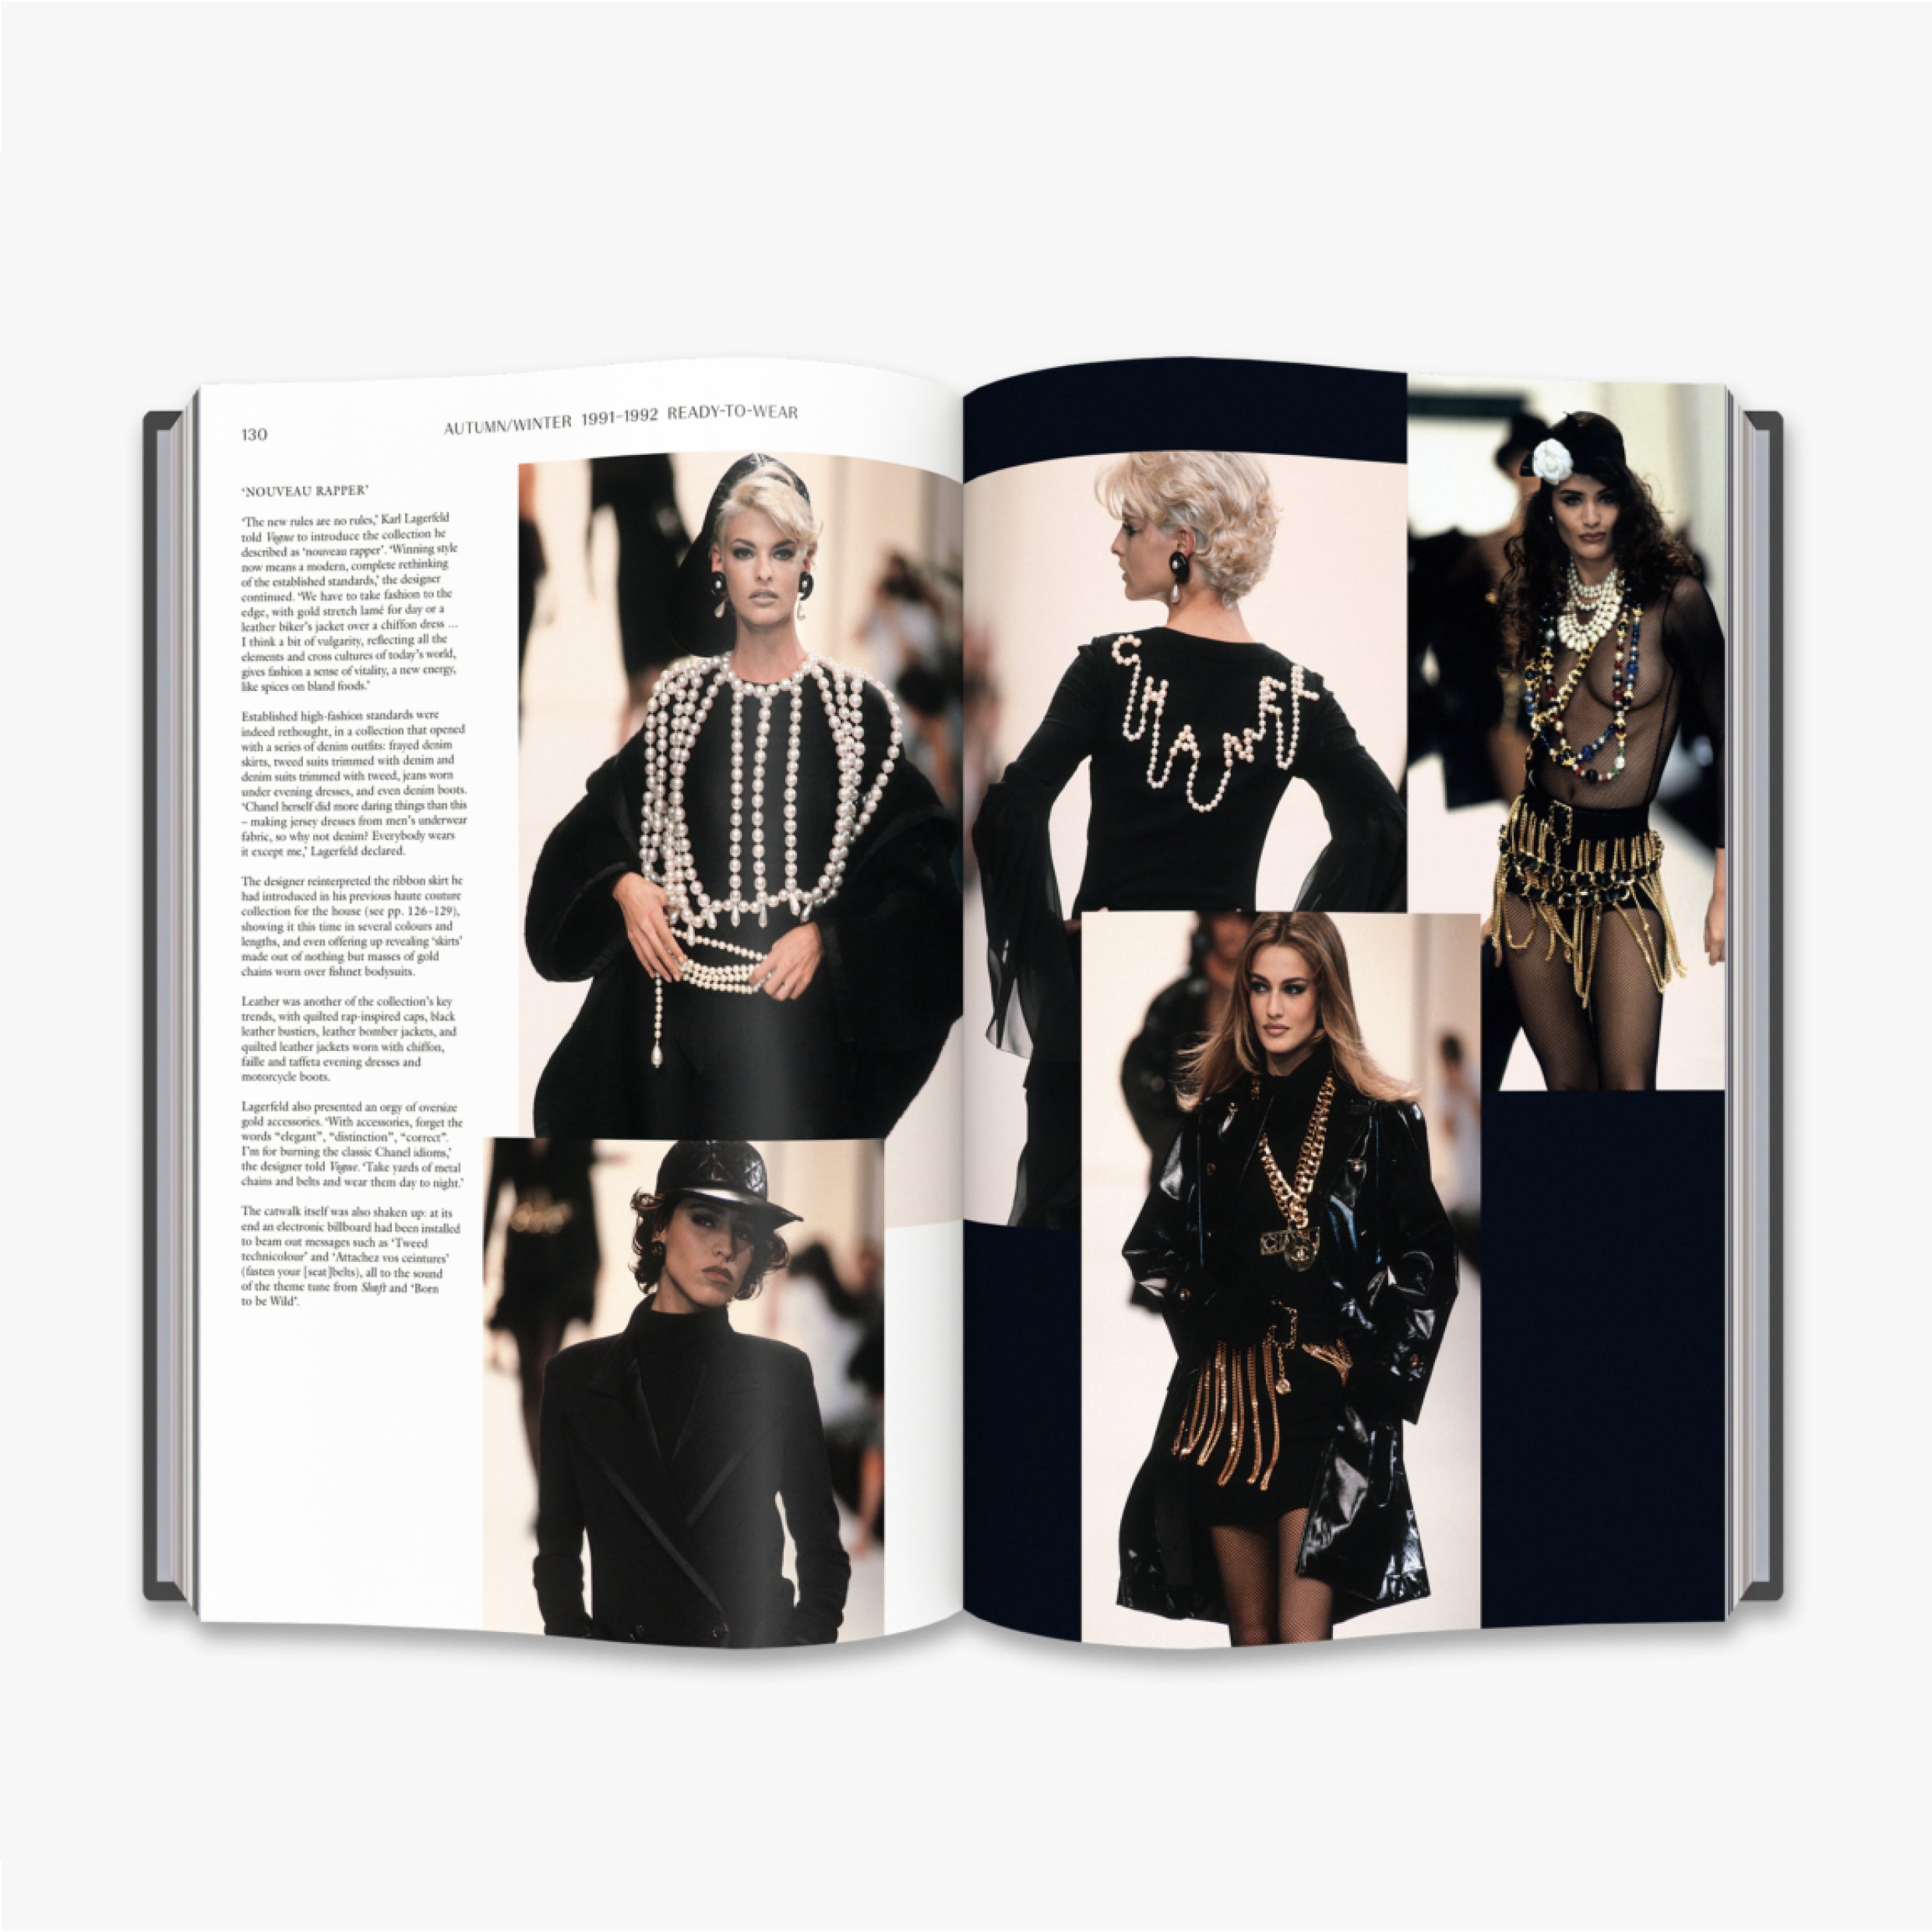 Chanel: The Complete Collections (Catwalk) 